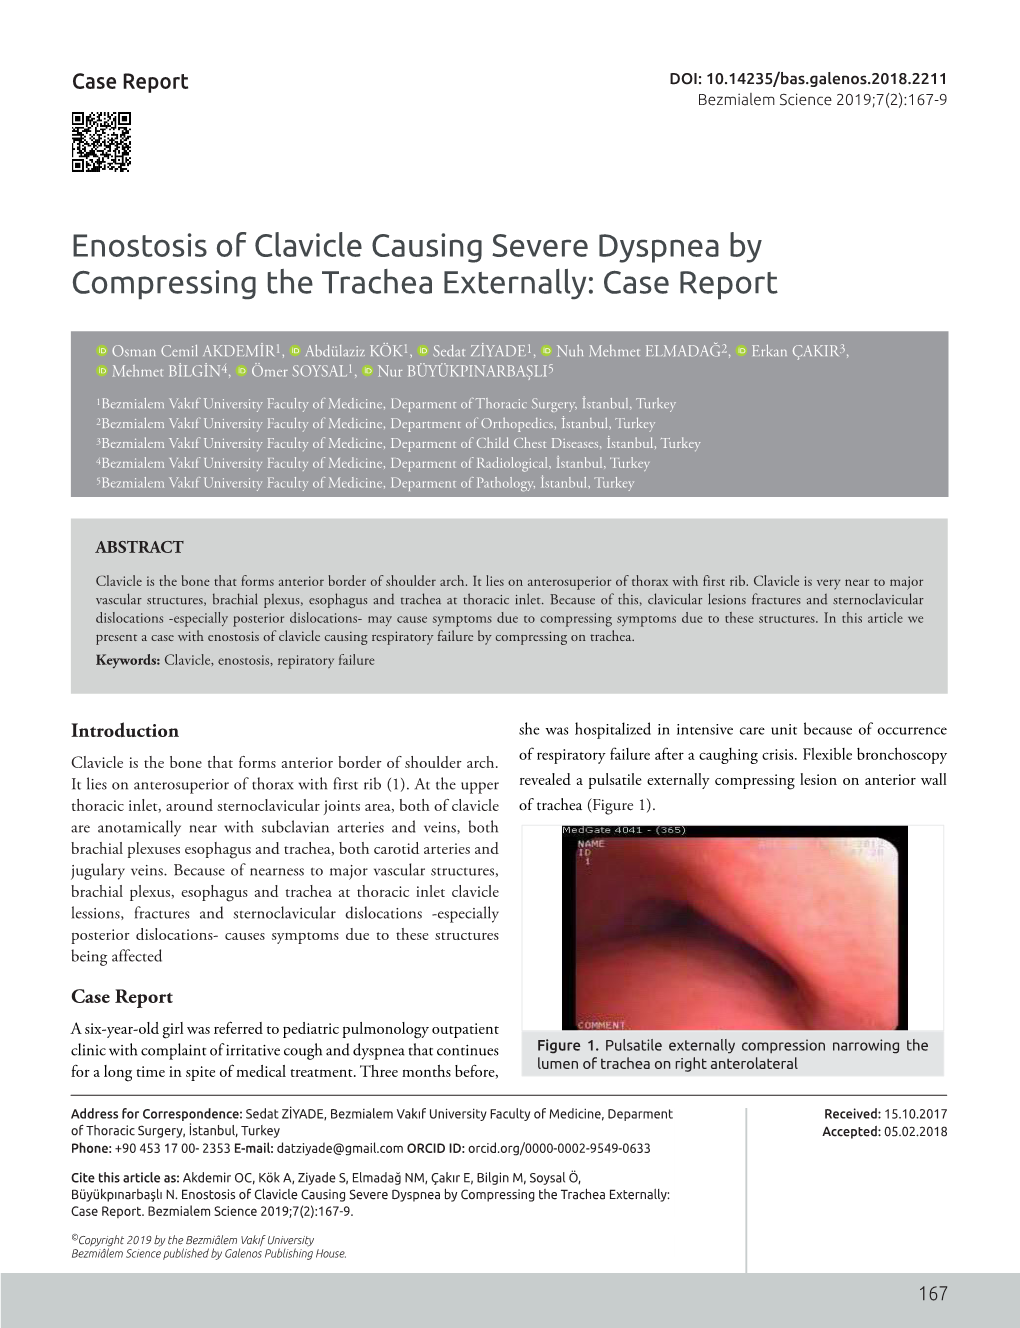 Enostosis of Clavicle Causing Severe Dyspnea by Compressing the Trachea Externally: Case Report